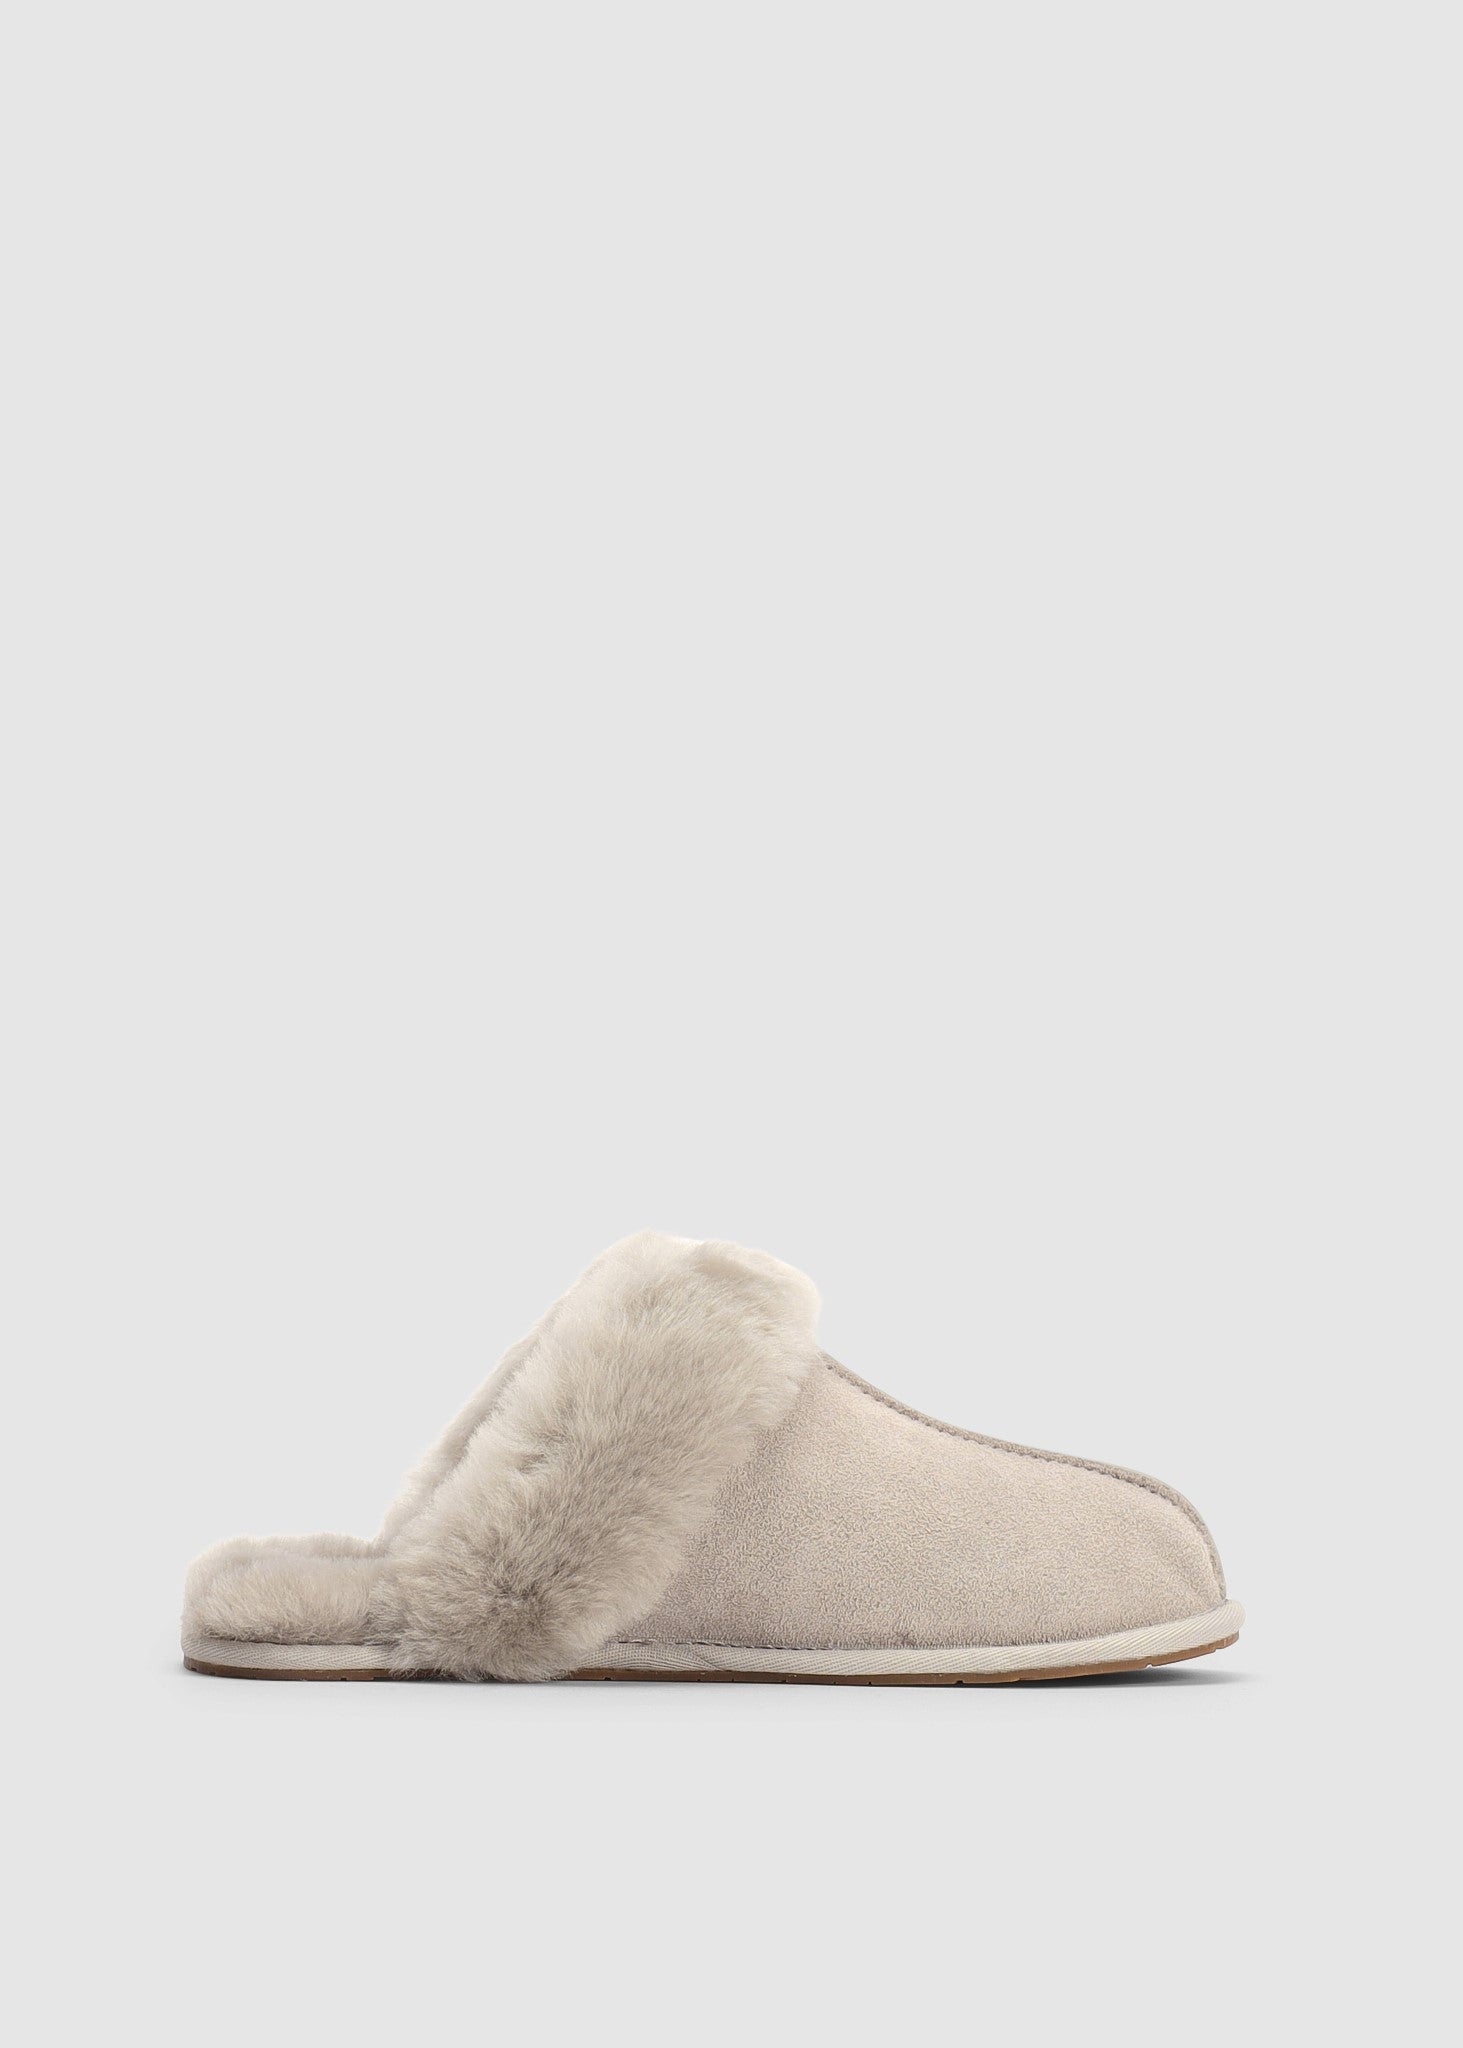 Image of Ugg Womens Scuffette II Slippers In Goat